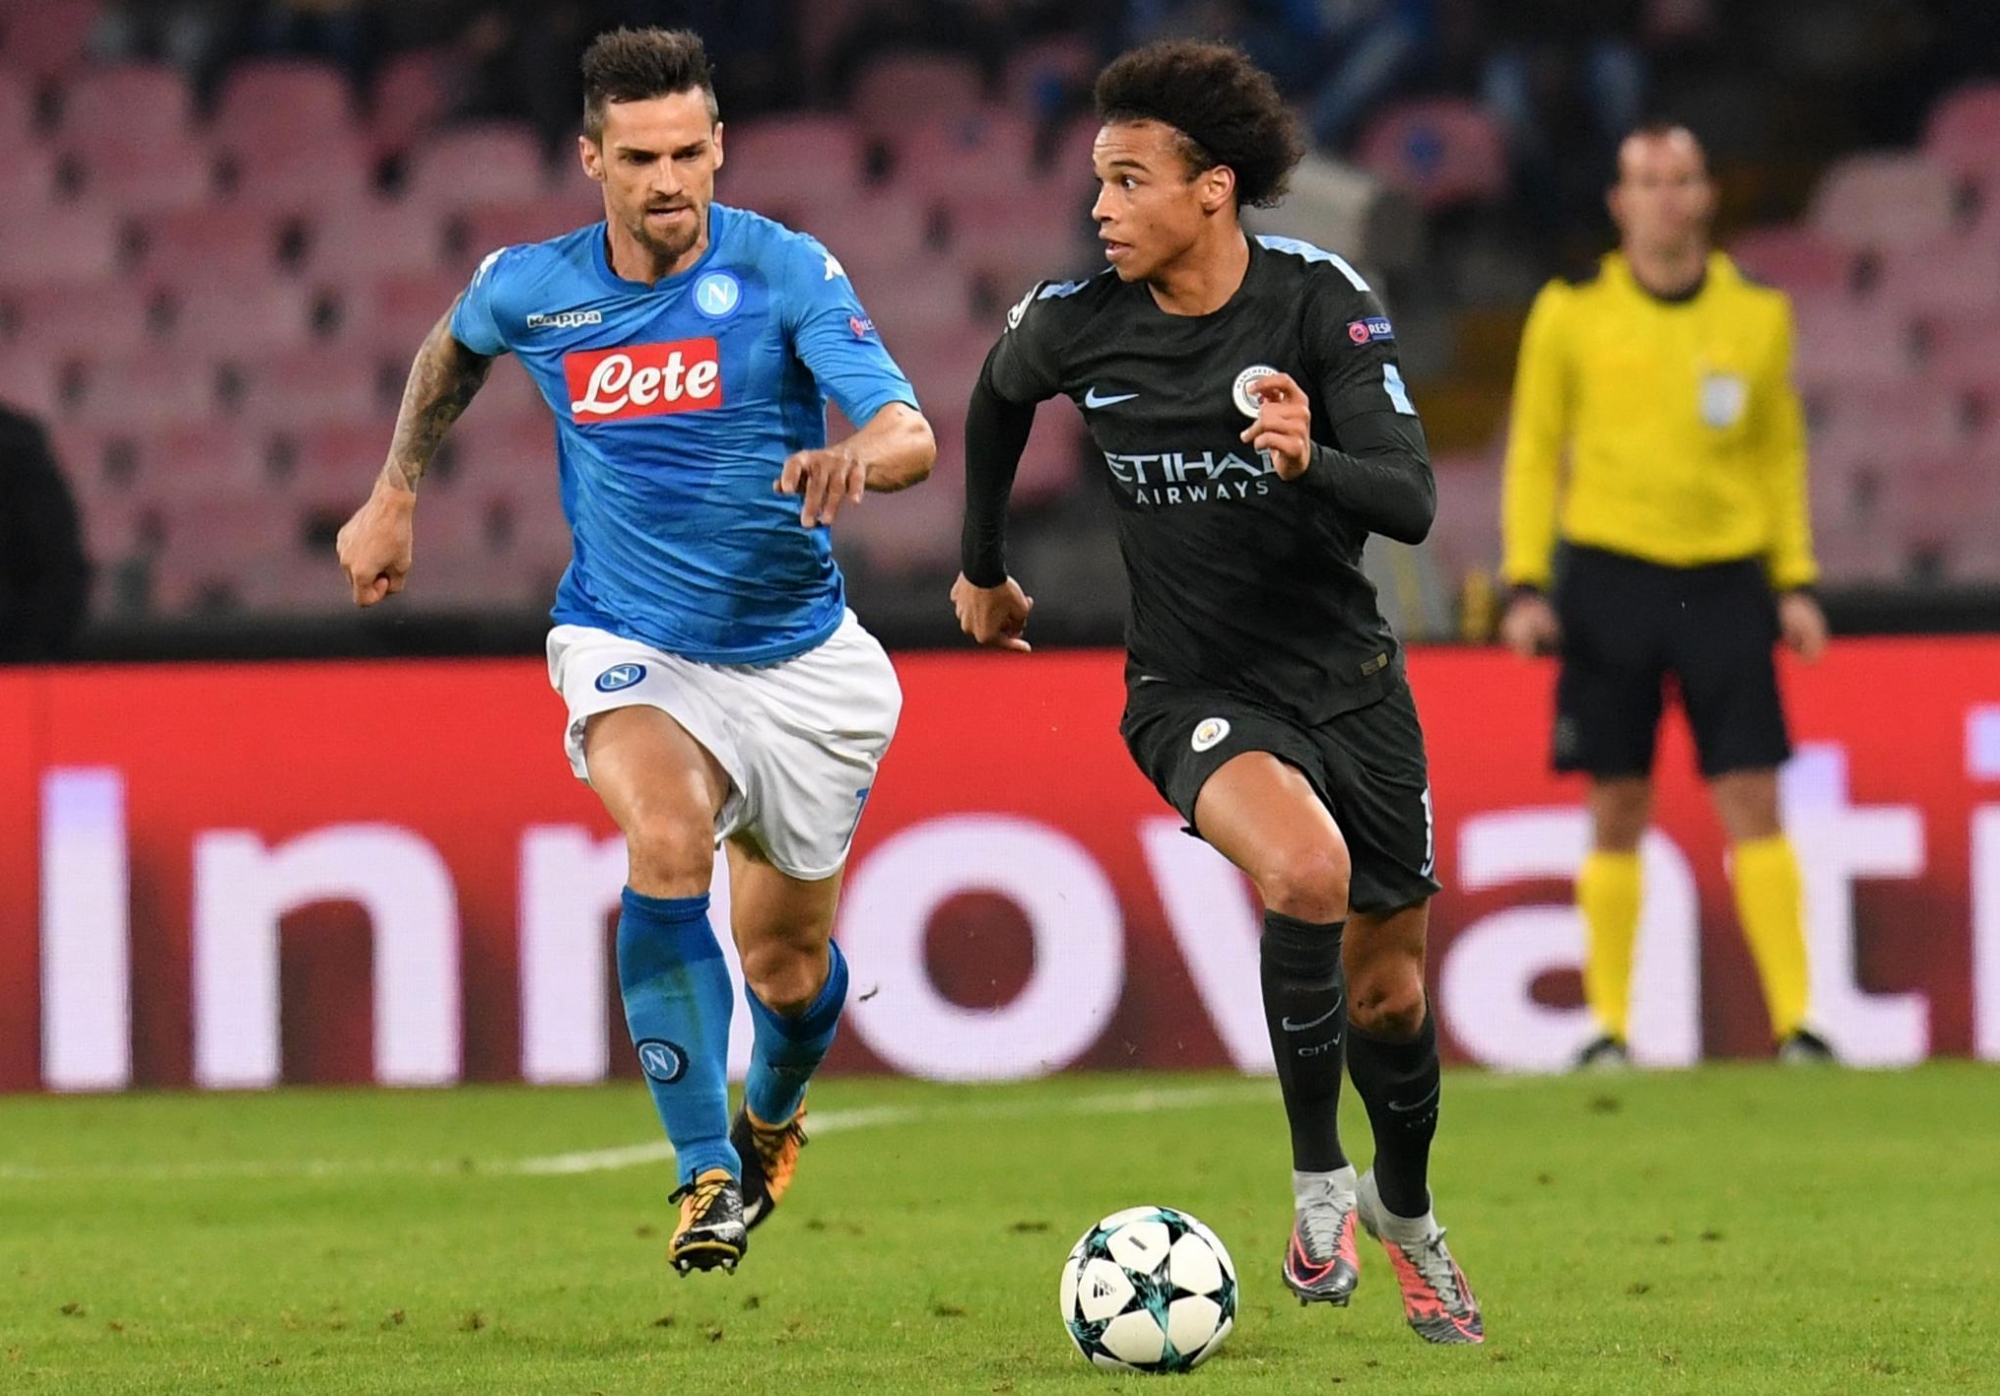 Napoli's Christian Maggio, left, and Manchester City's Leroy Sane' go for the ball during the Champions League Group F soccer match between Napoli and Manchester City, at the San Paolo stadium in Naples, Italy, Wednesday, Nov. 1, 2017. (Ciro Fusco/ANSA via AP) Italy Soccer Champions League